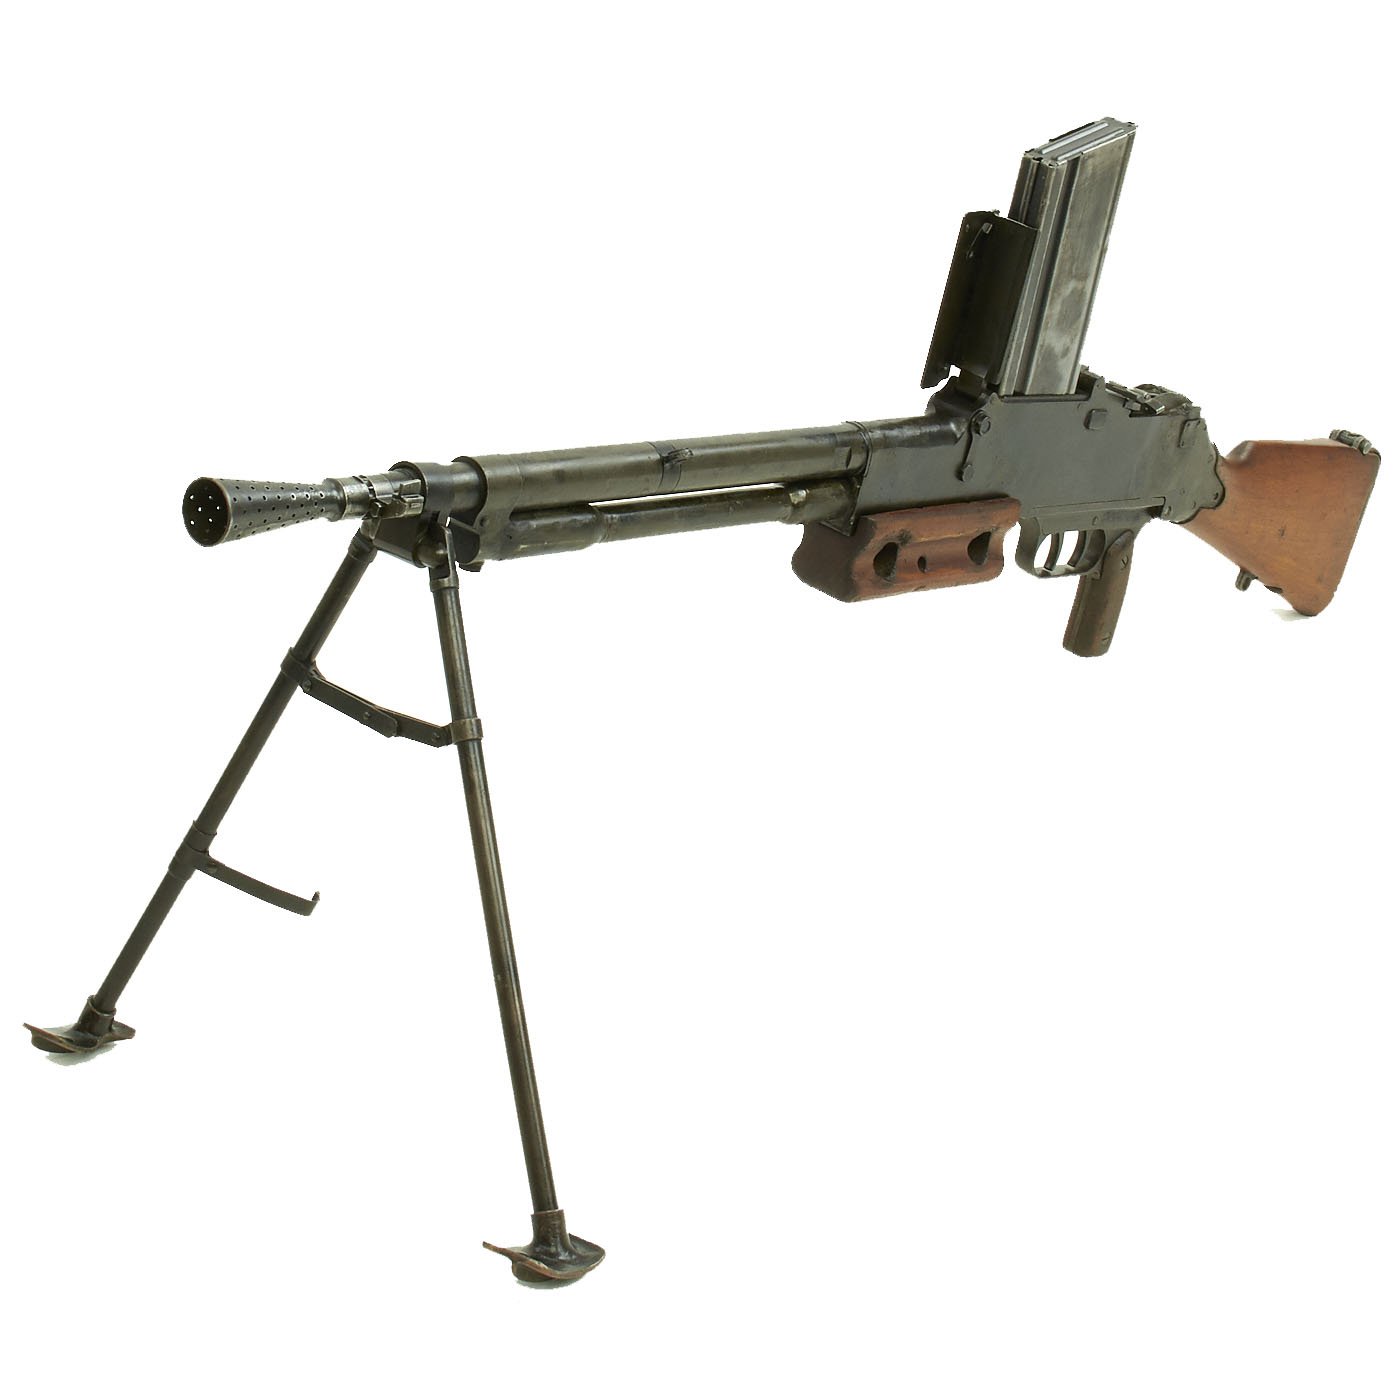 Original French Wwii Fusil Mitrailleur Modele 1924 M29 Display Lmg Wit International Military Antiques